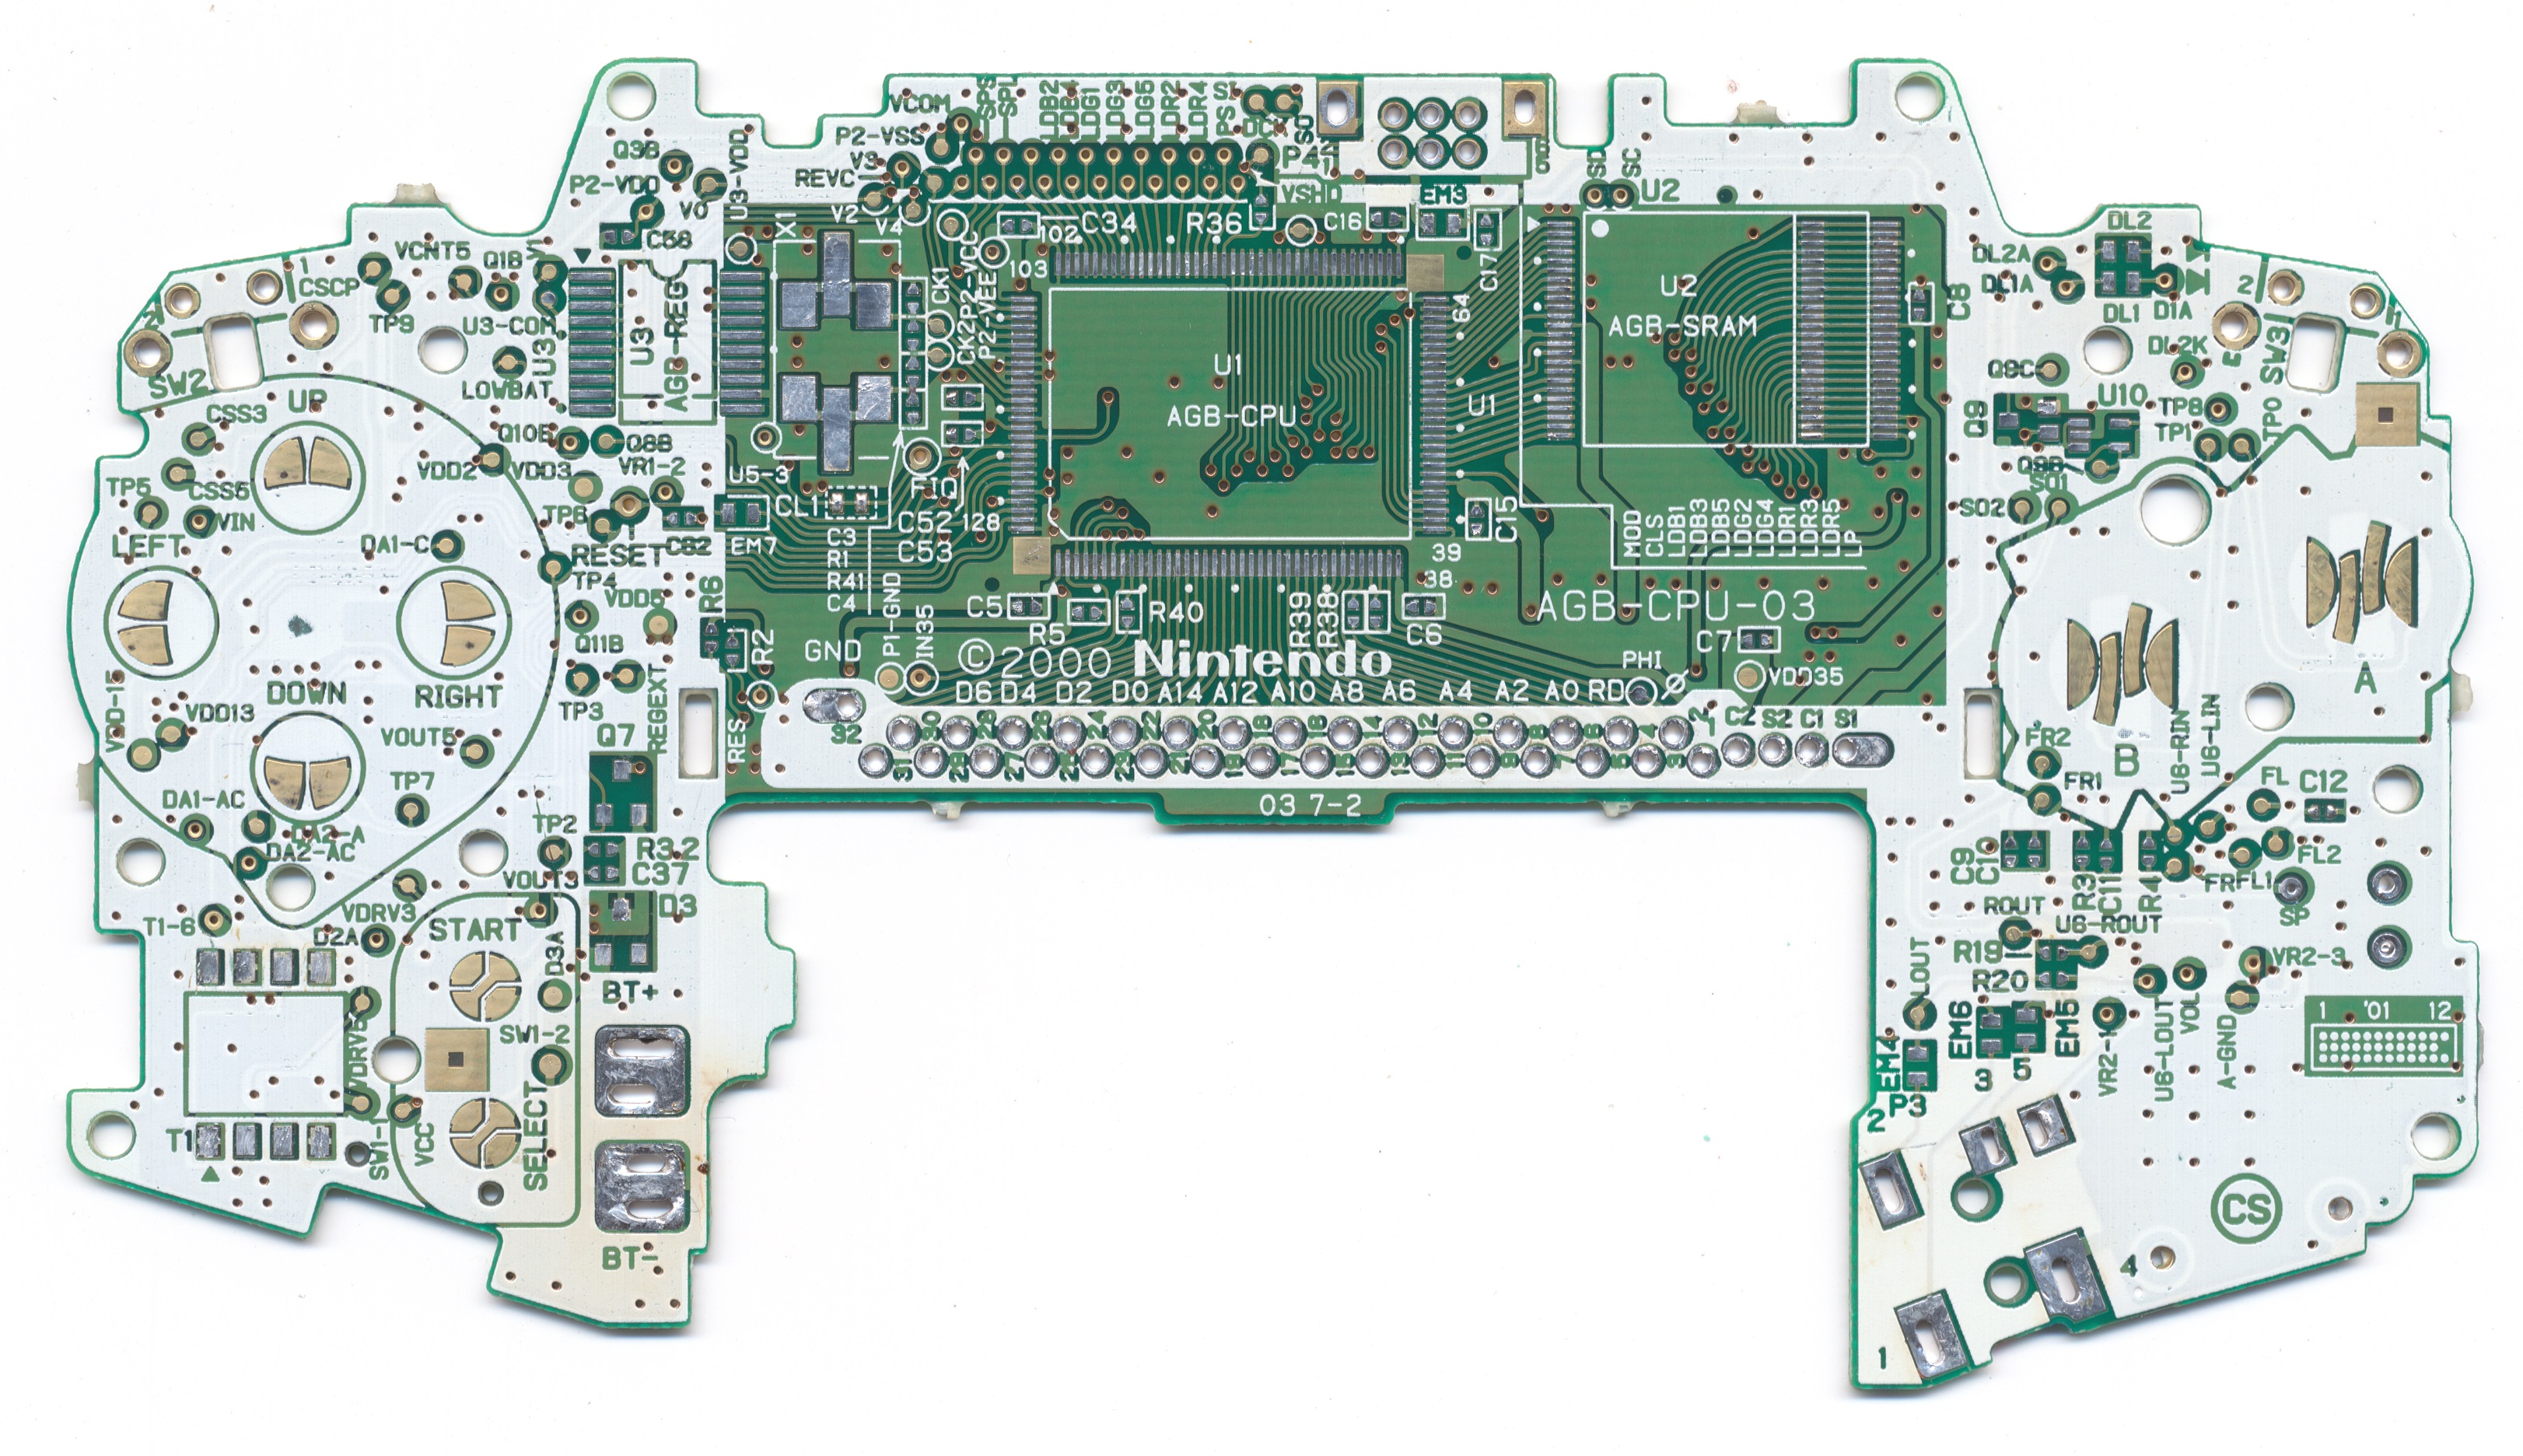 GAME_BOY_ADVANCE_AGB-CPU-03_TOP_WITHOUT_PARTS_PCB_SCAN_ATV.jpg